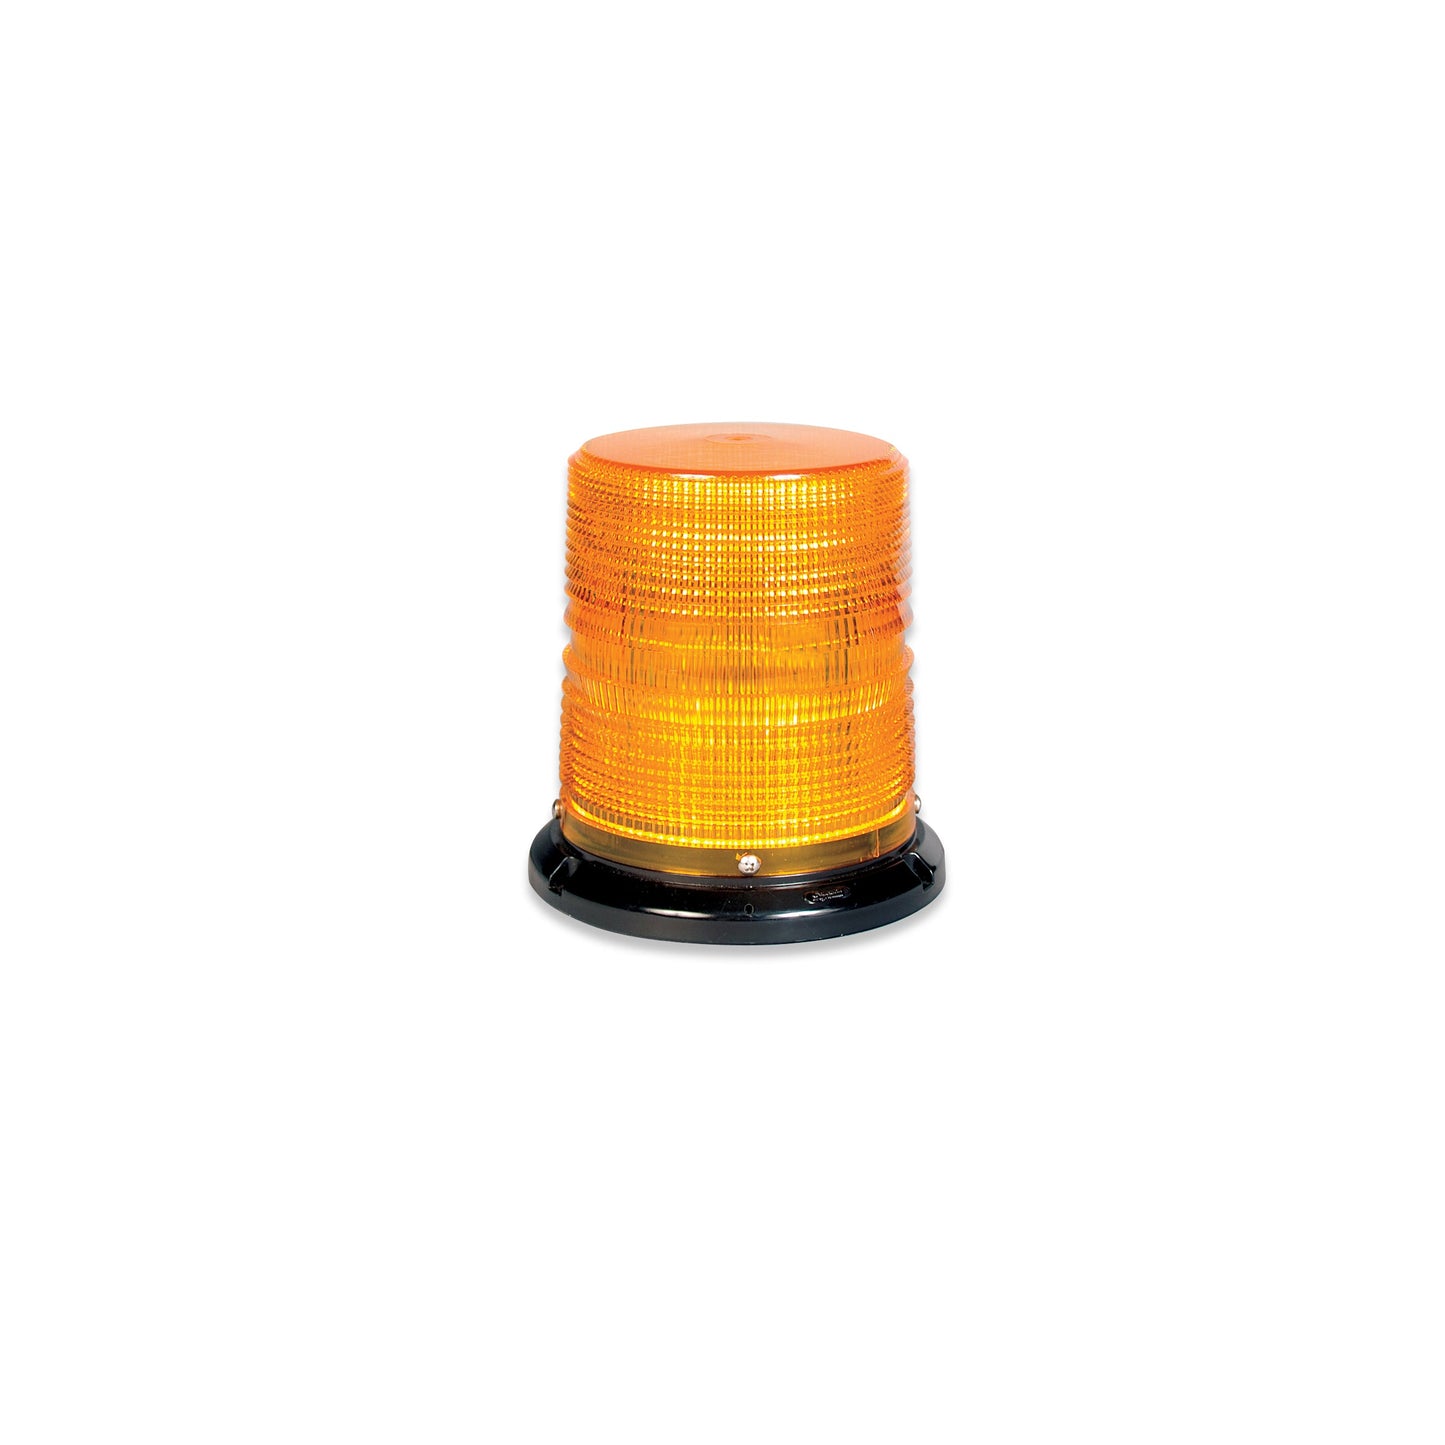 Soundoff Signal ELB45BCL0AC 4500 Series Led Beacon, 10-30V, Sae J845 Class 1 - Flat/Pipe Mount, 4" Clear Dome/ Amber Leds